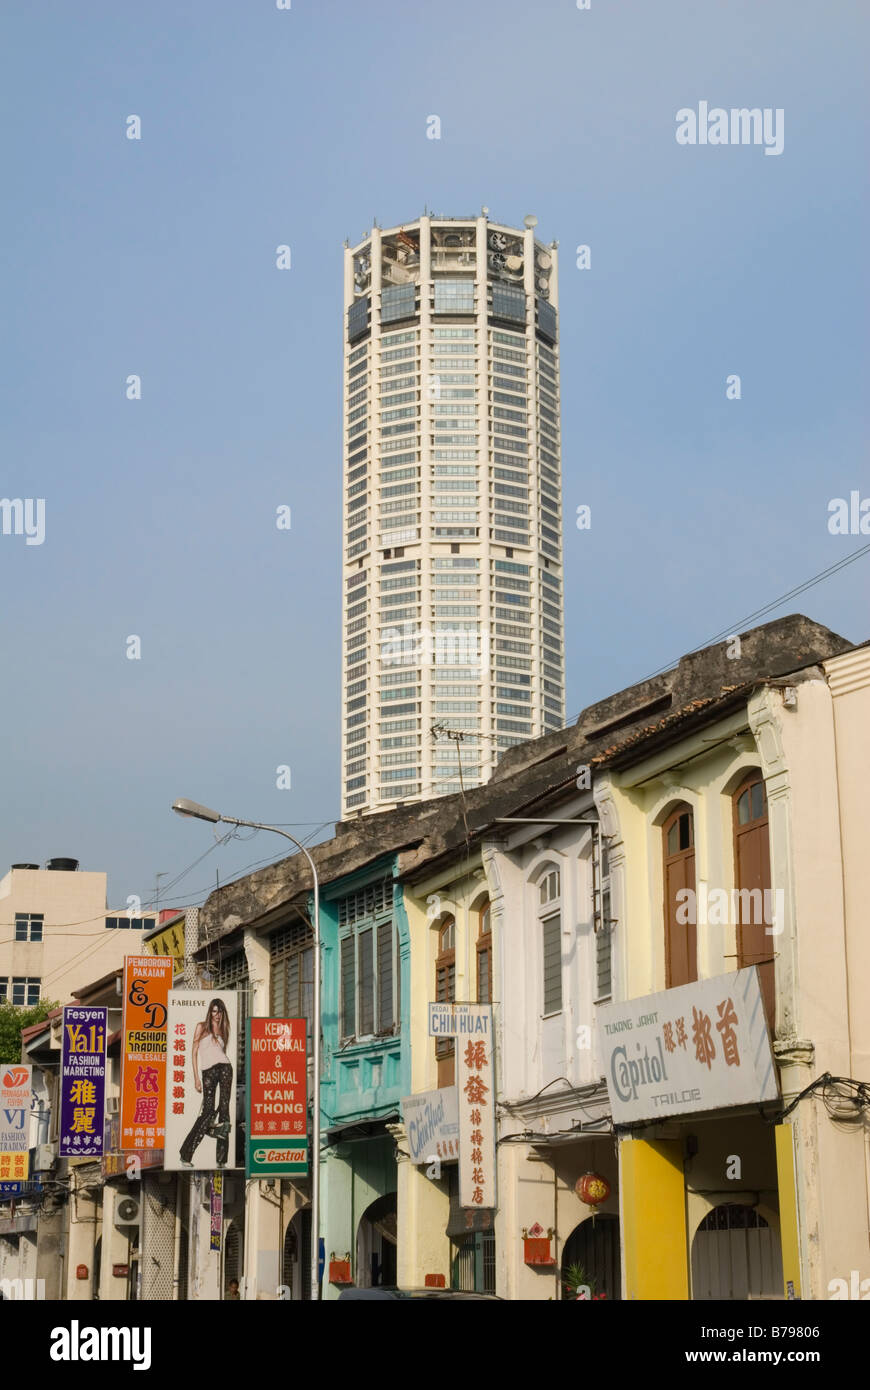 KOMTAR Tower and old shop-houses in Georgetown, Penang Stock Photo